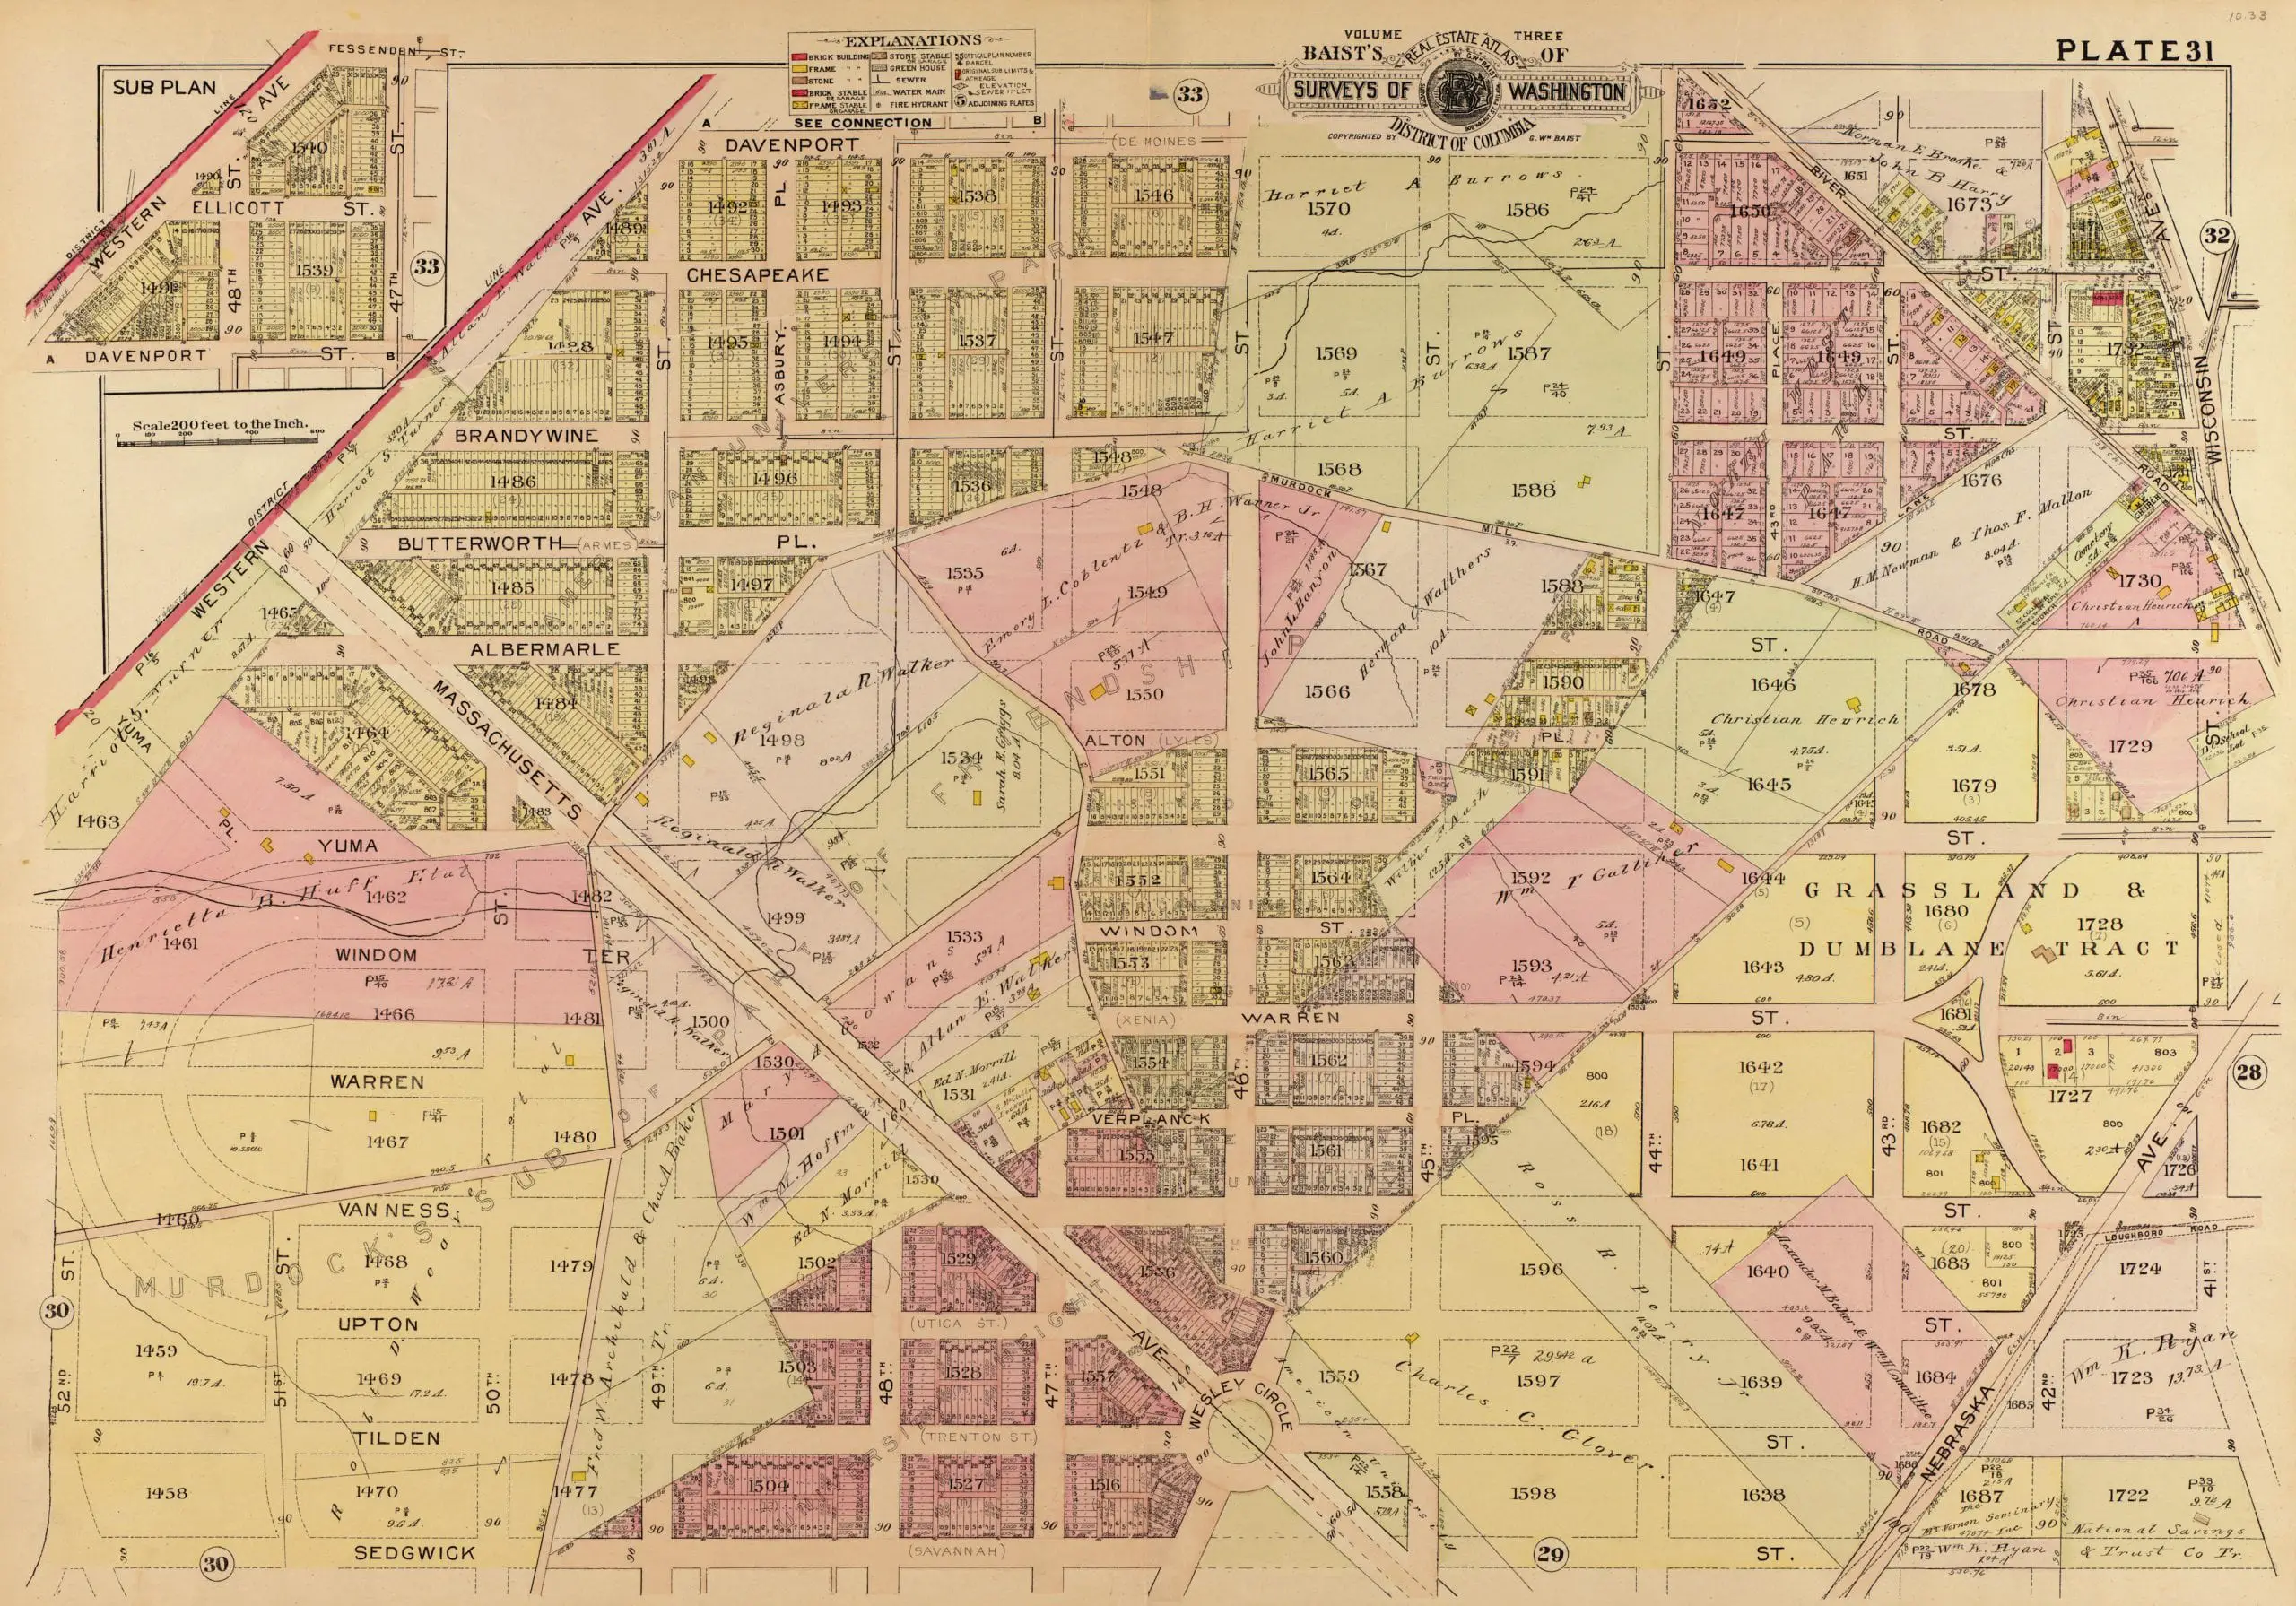 1903 Baist real estate map of Spring Valley and American University